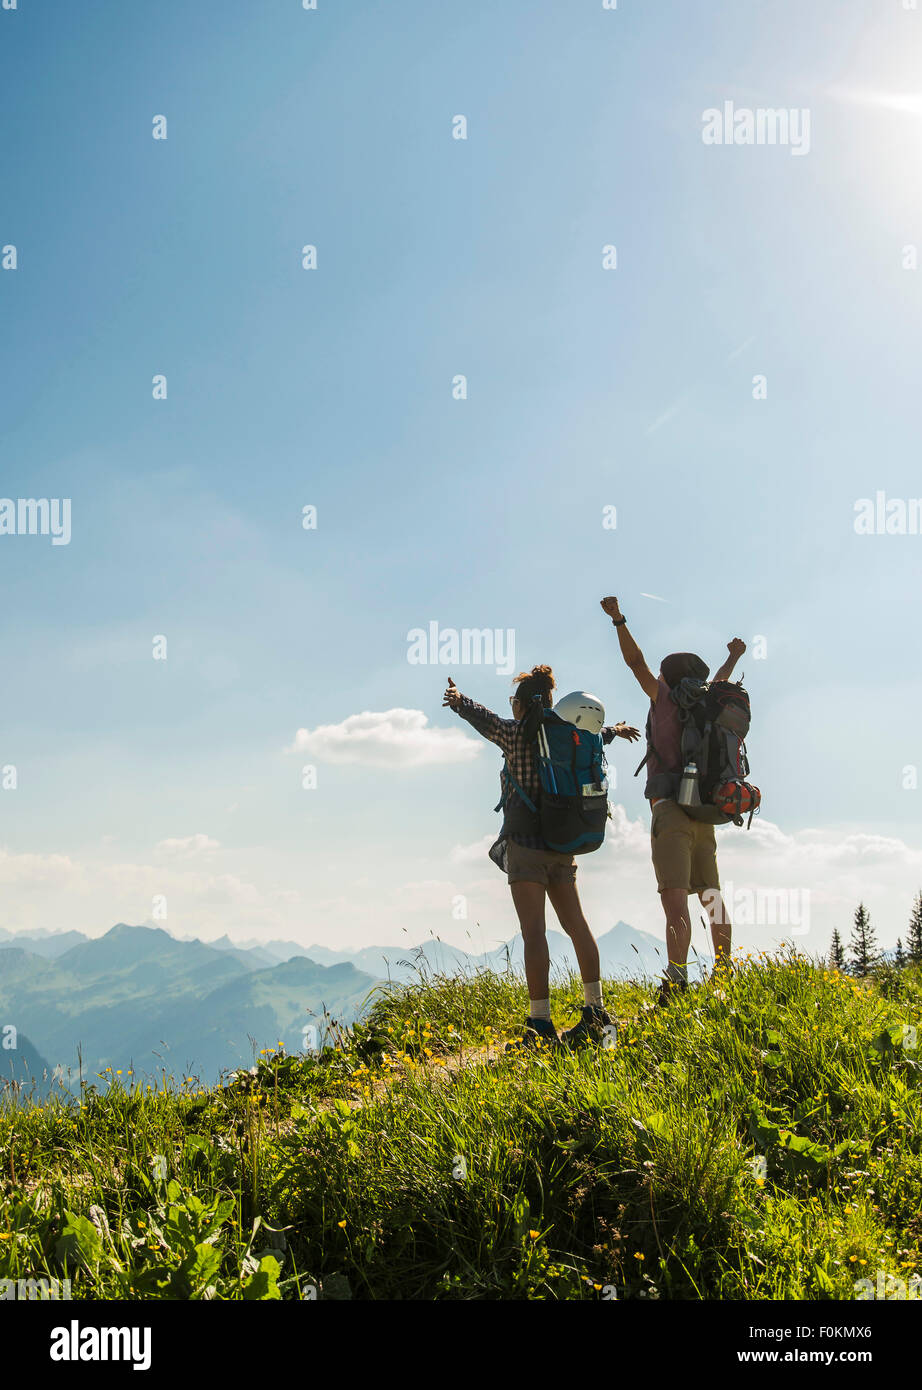 Autriche, Tyrol, Tannheimer Tal, encourageant les jeunes couple standing on mountain trail looking at view Banque D'Images